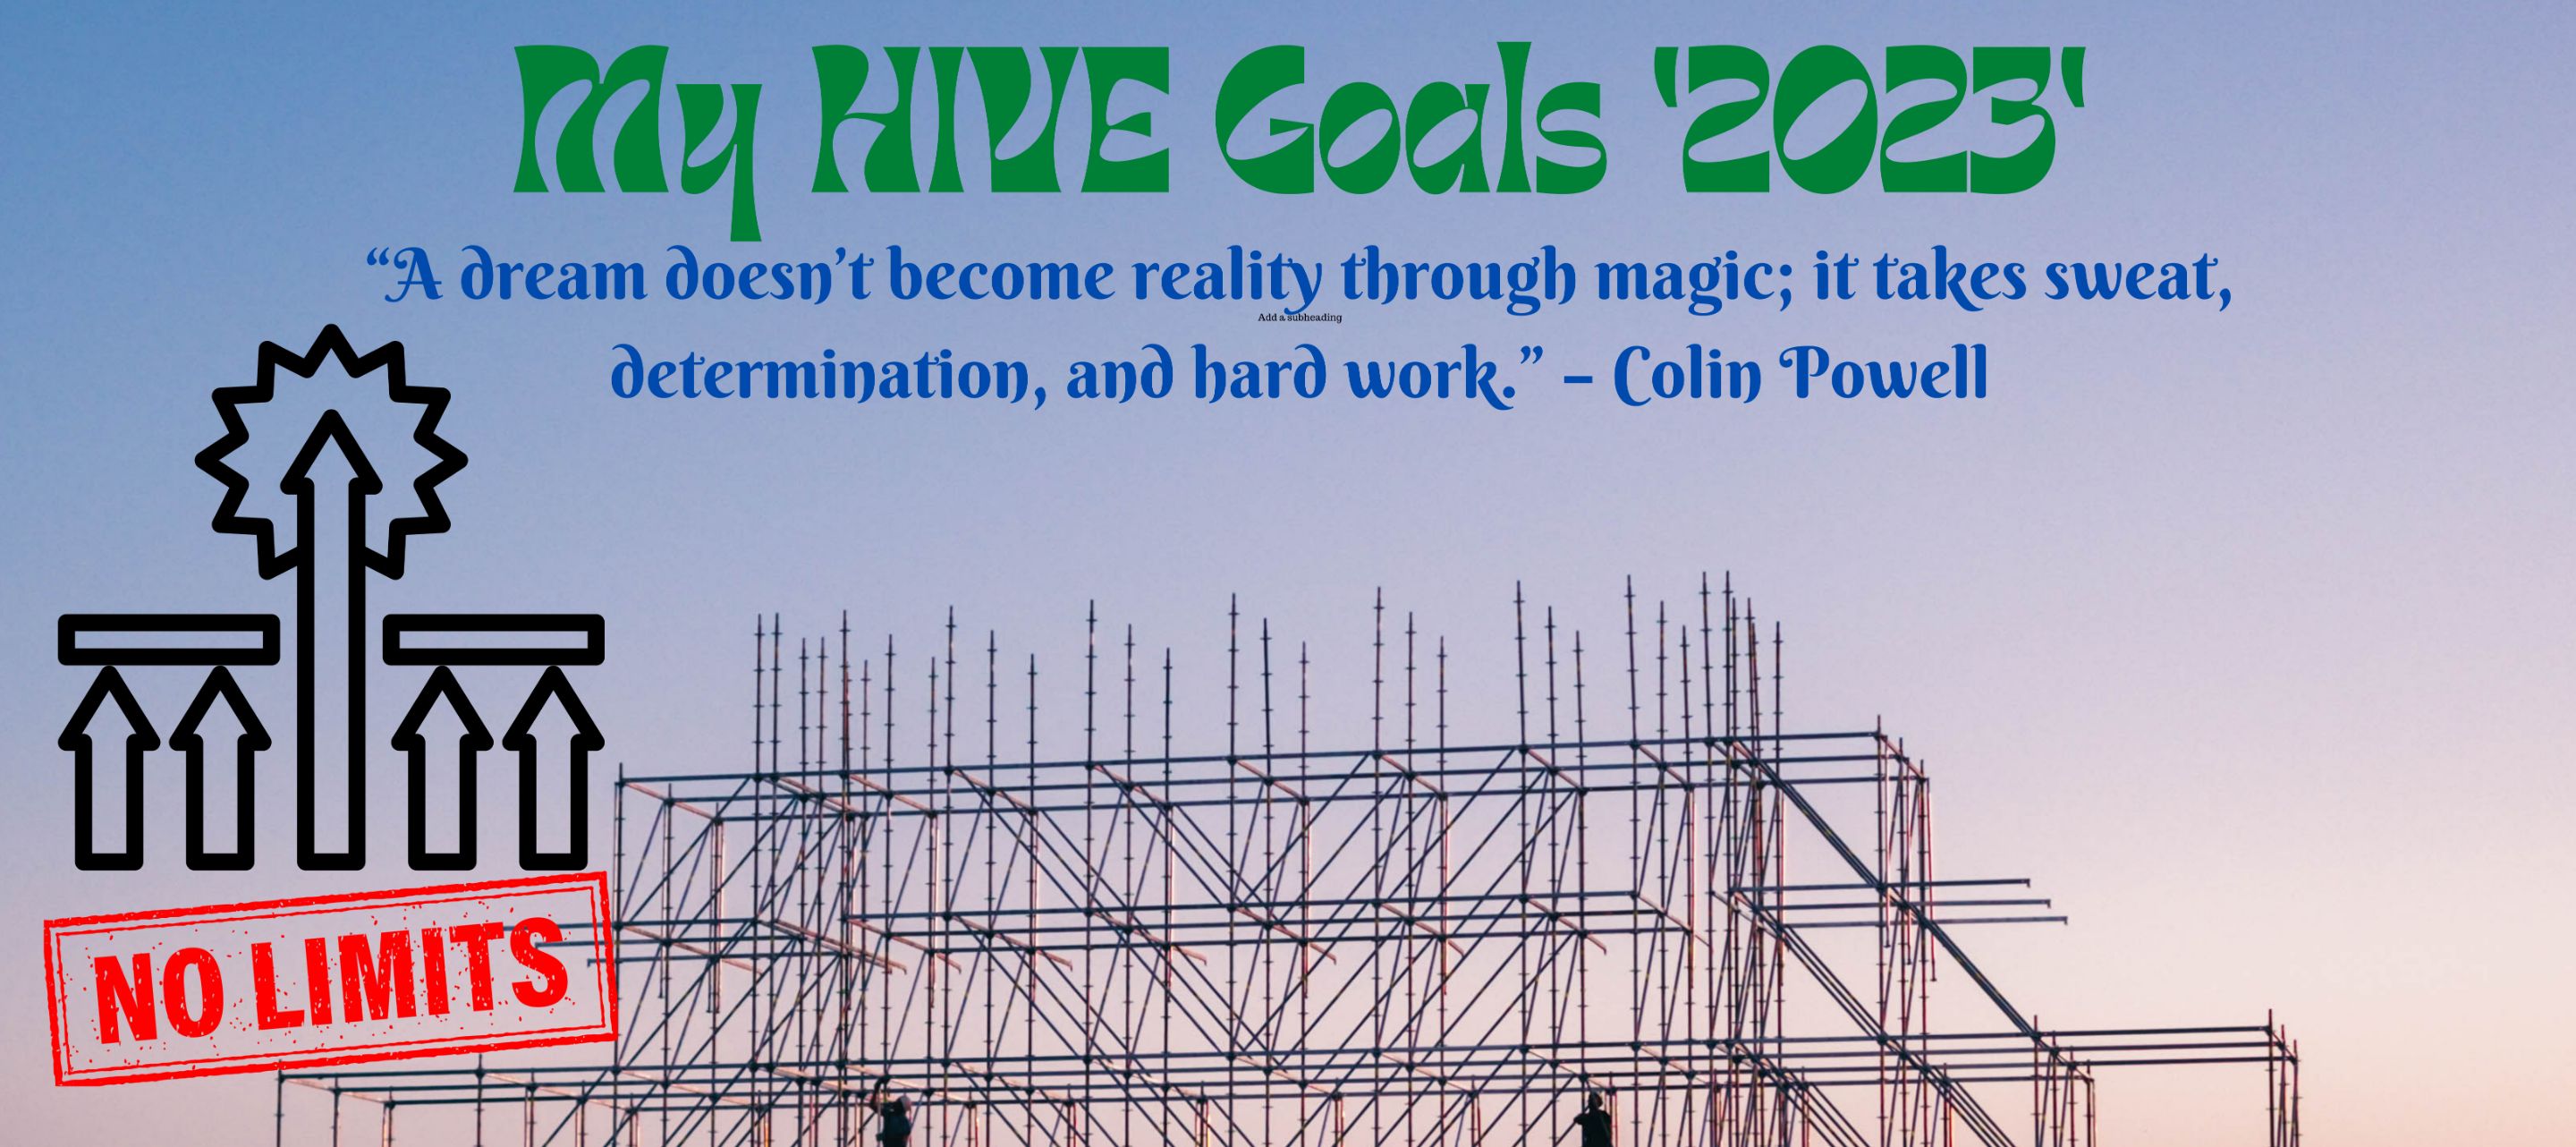 @successchar/lots-of-goals-for-2023-not-just-building-my-crypto-world-on-hive-or-putting-it-all-together-or-cleaning-up-and-soaring-into-the-future